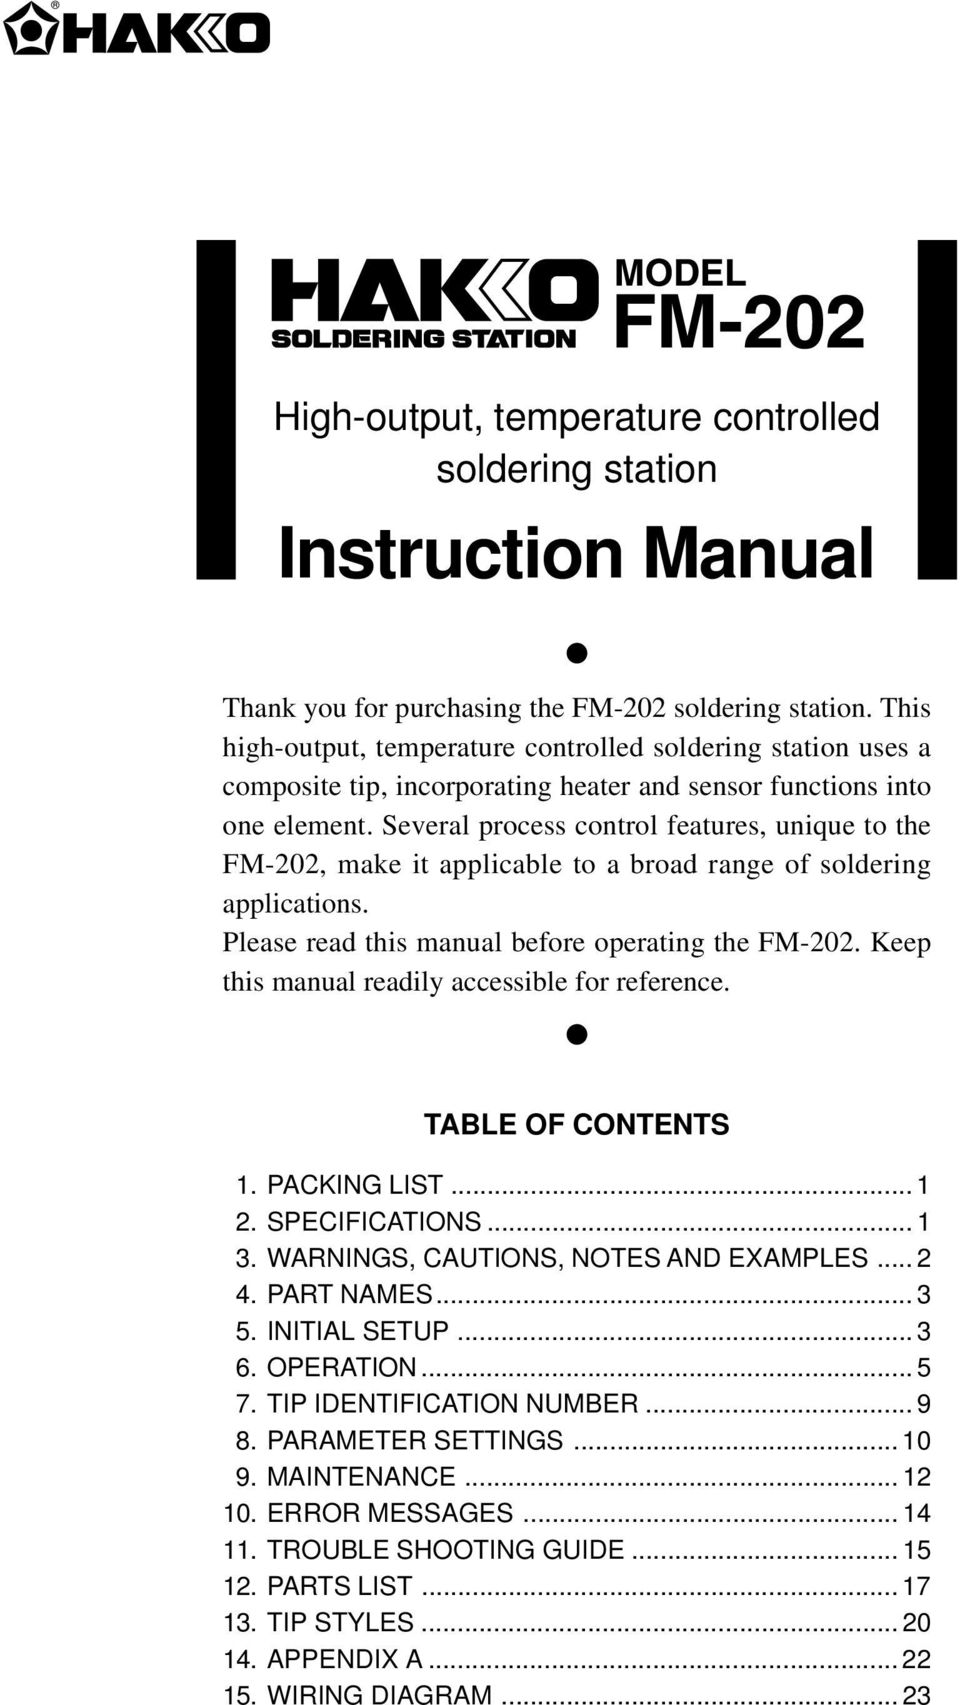 Several process control features, unique to the FM-202, make it applicable to a broad range of soldering applications. Please read this manual before operating the FM-202.